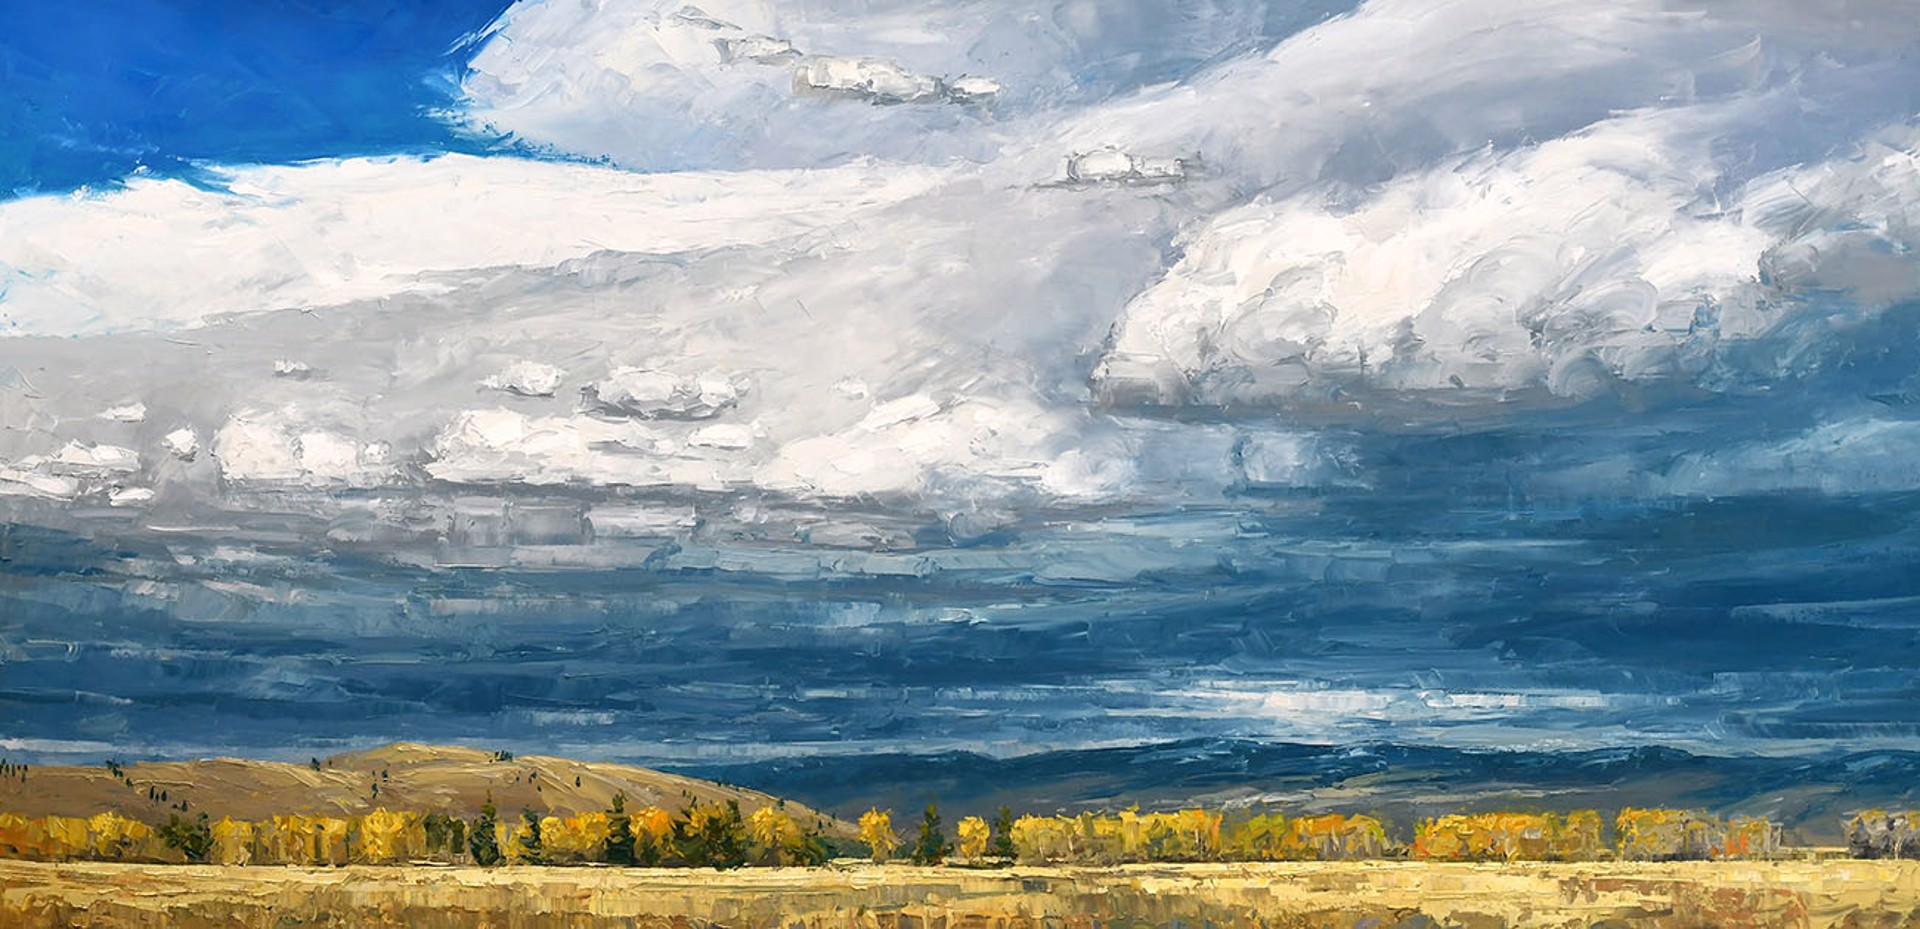 Original Oil Painting By Caleb Meyer Featuring A Landscape Of The Plains With Big Deep Blue Stormy Sky